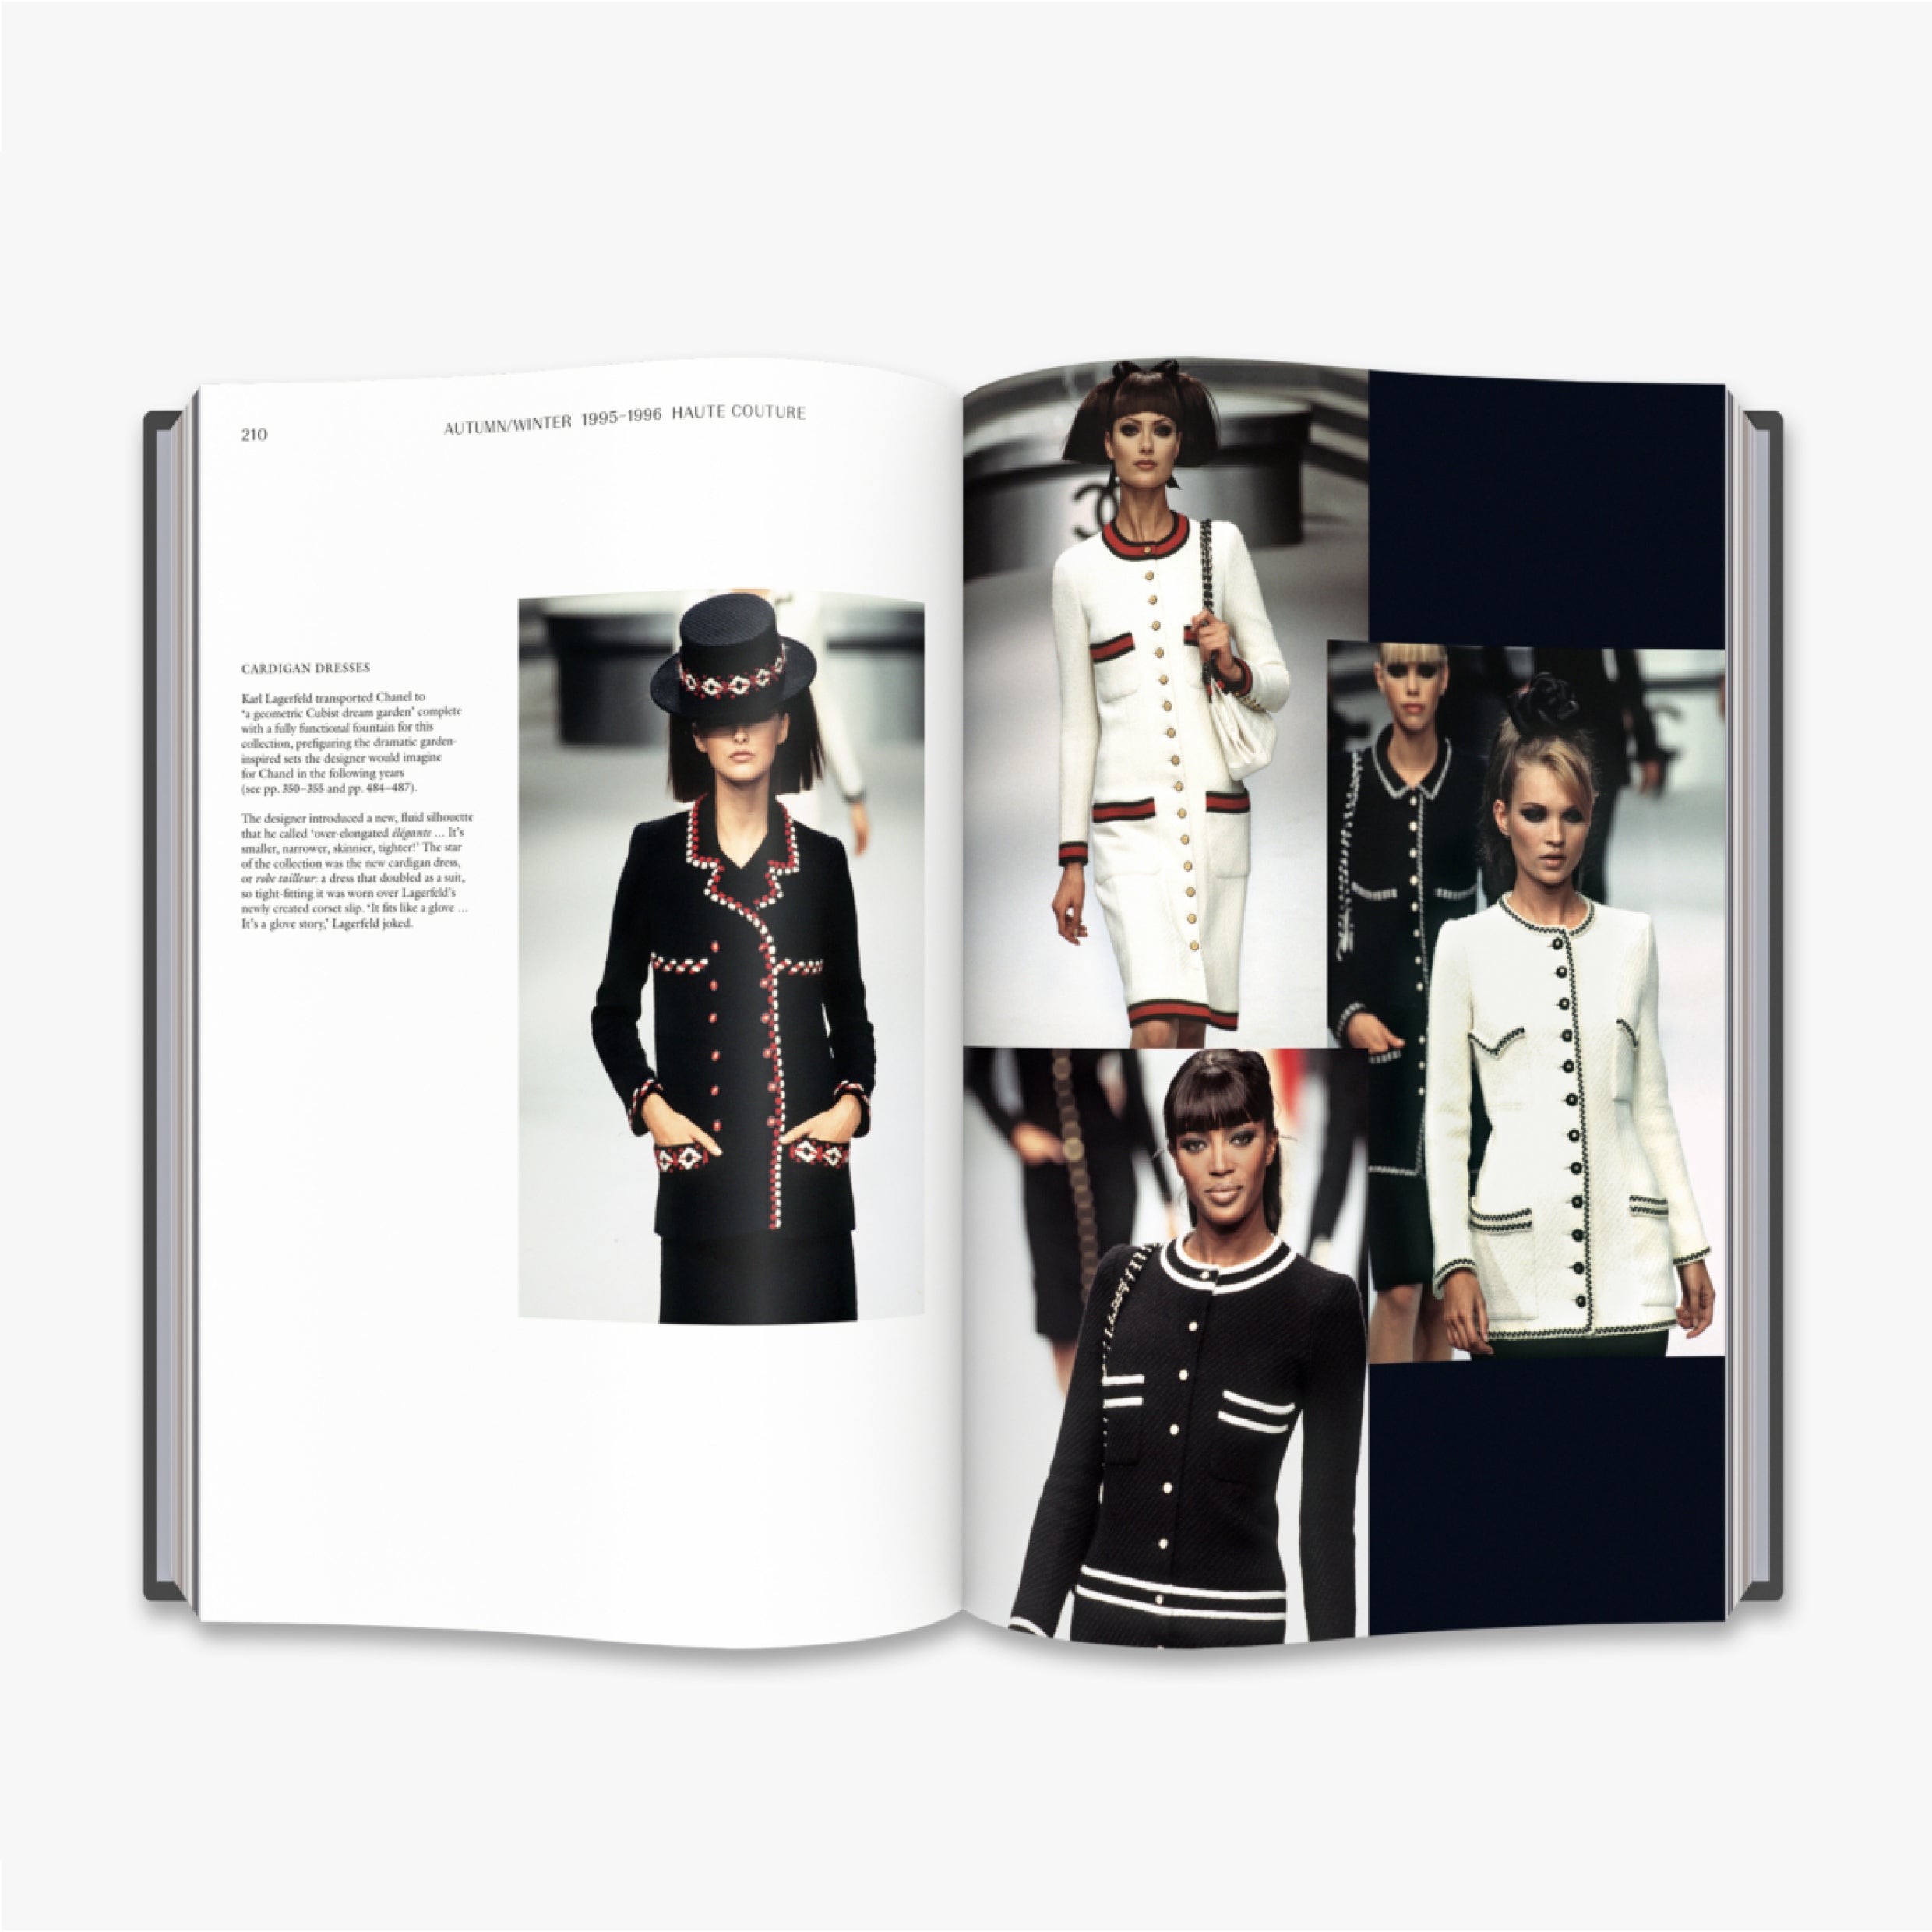 catwalk collection books